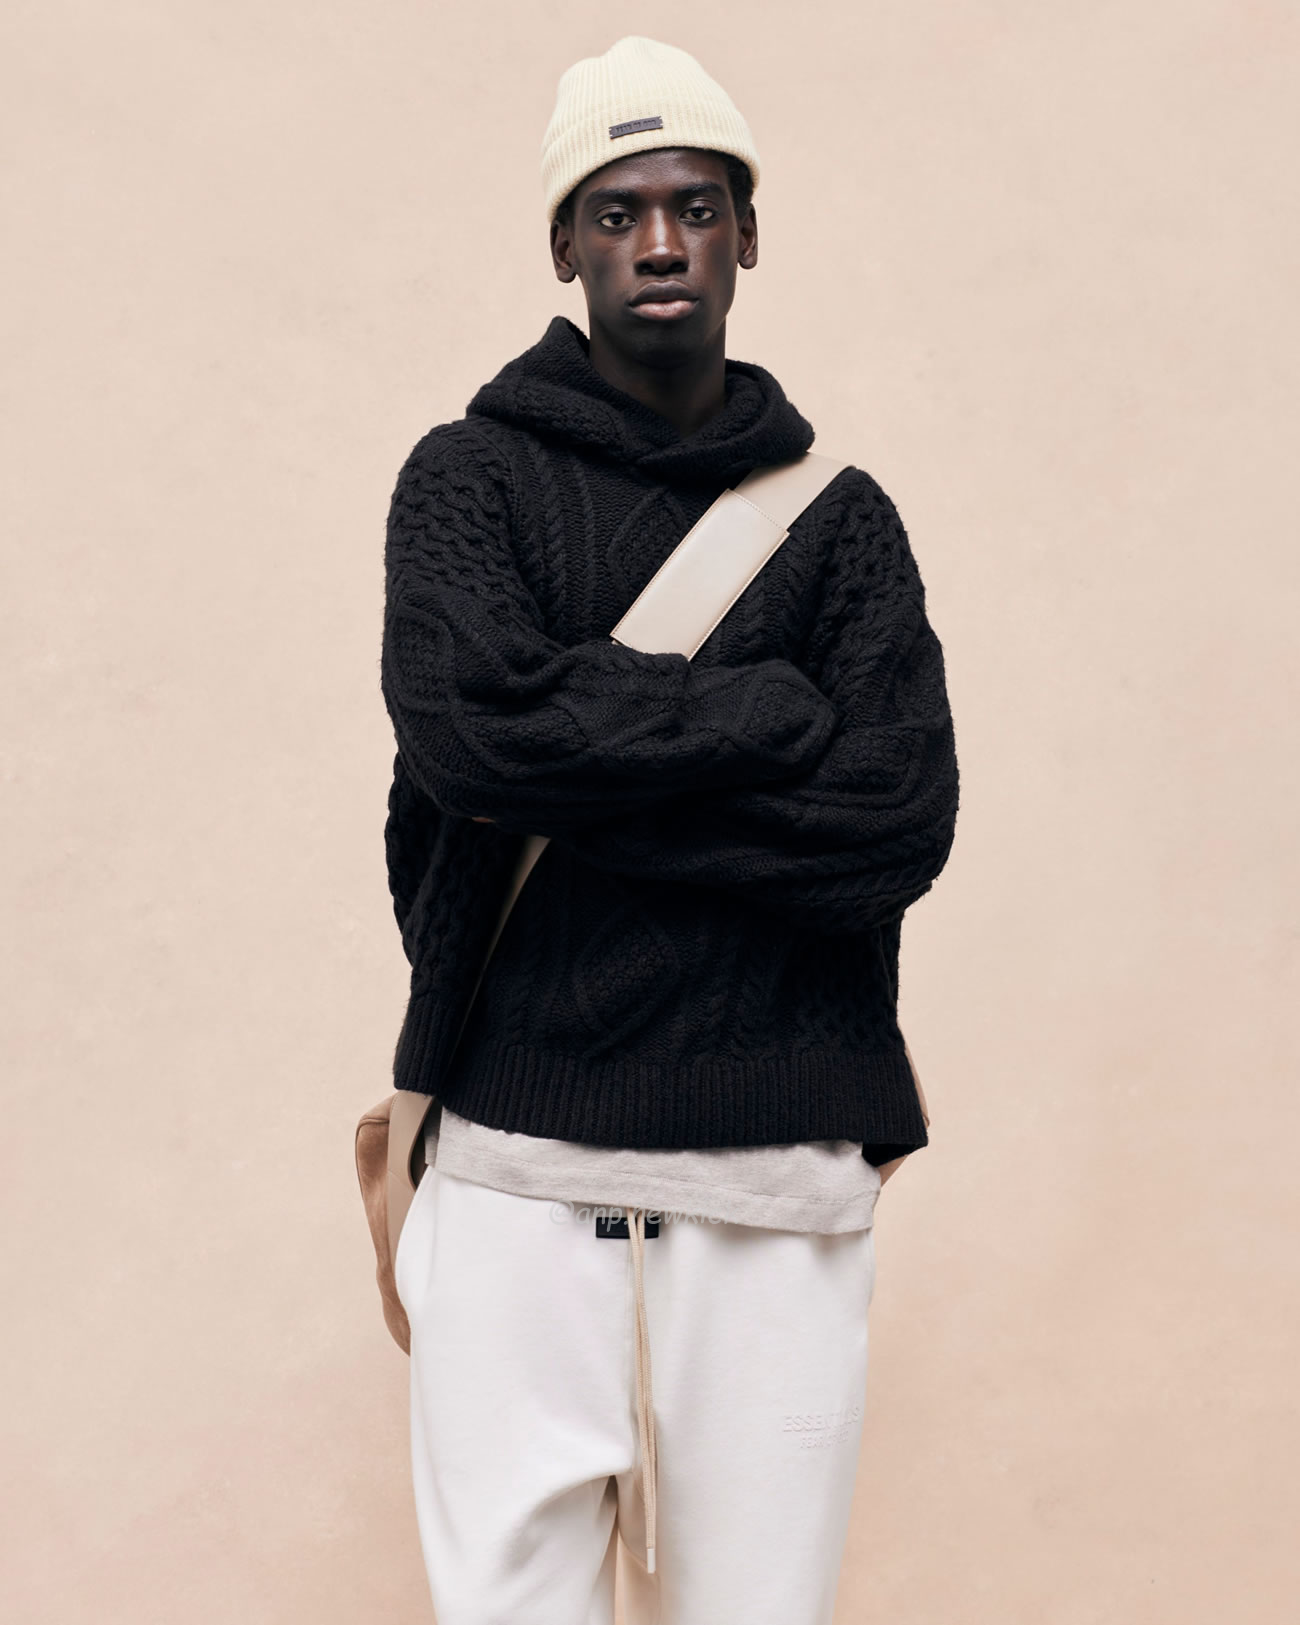 Fear Of God Essentials Fog 23fw New Collection Of Hooded Sweaters In Black Elephant White Beige White S Xl (8) - newkick.org